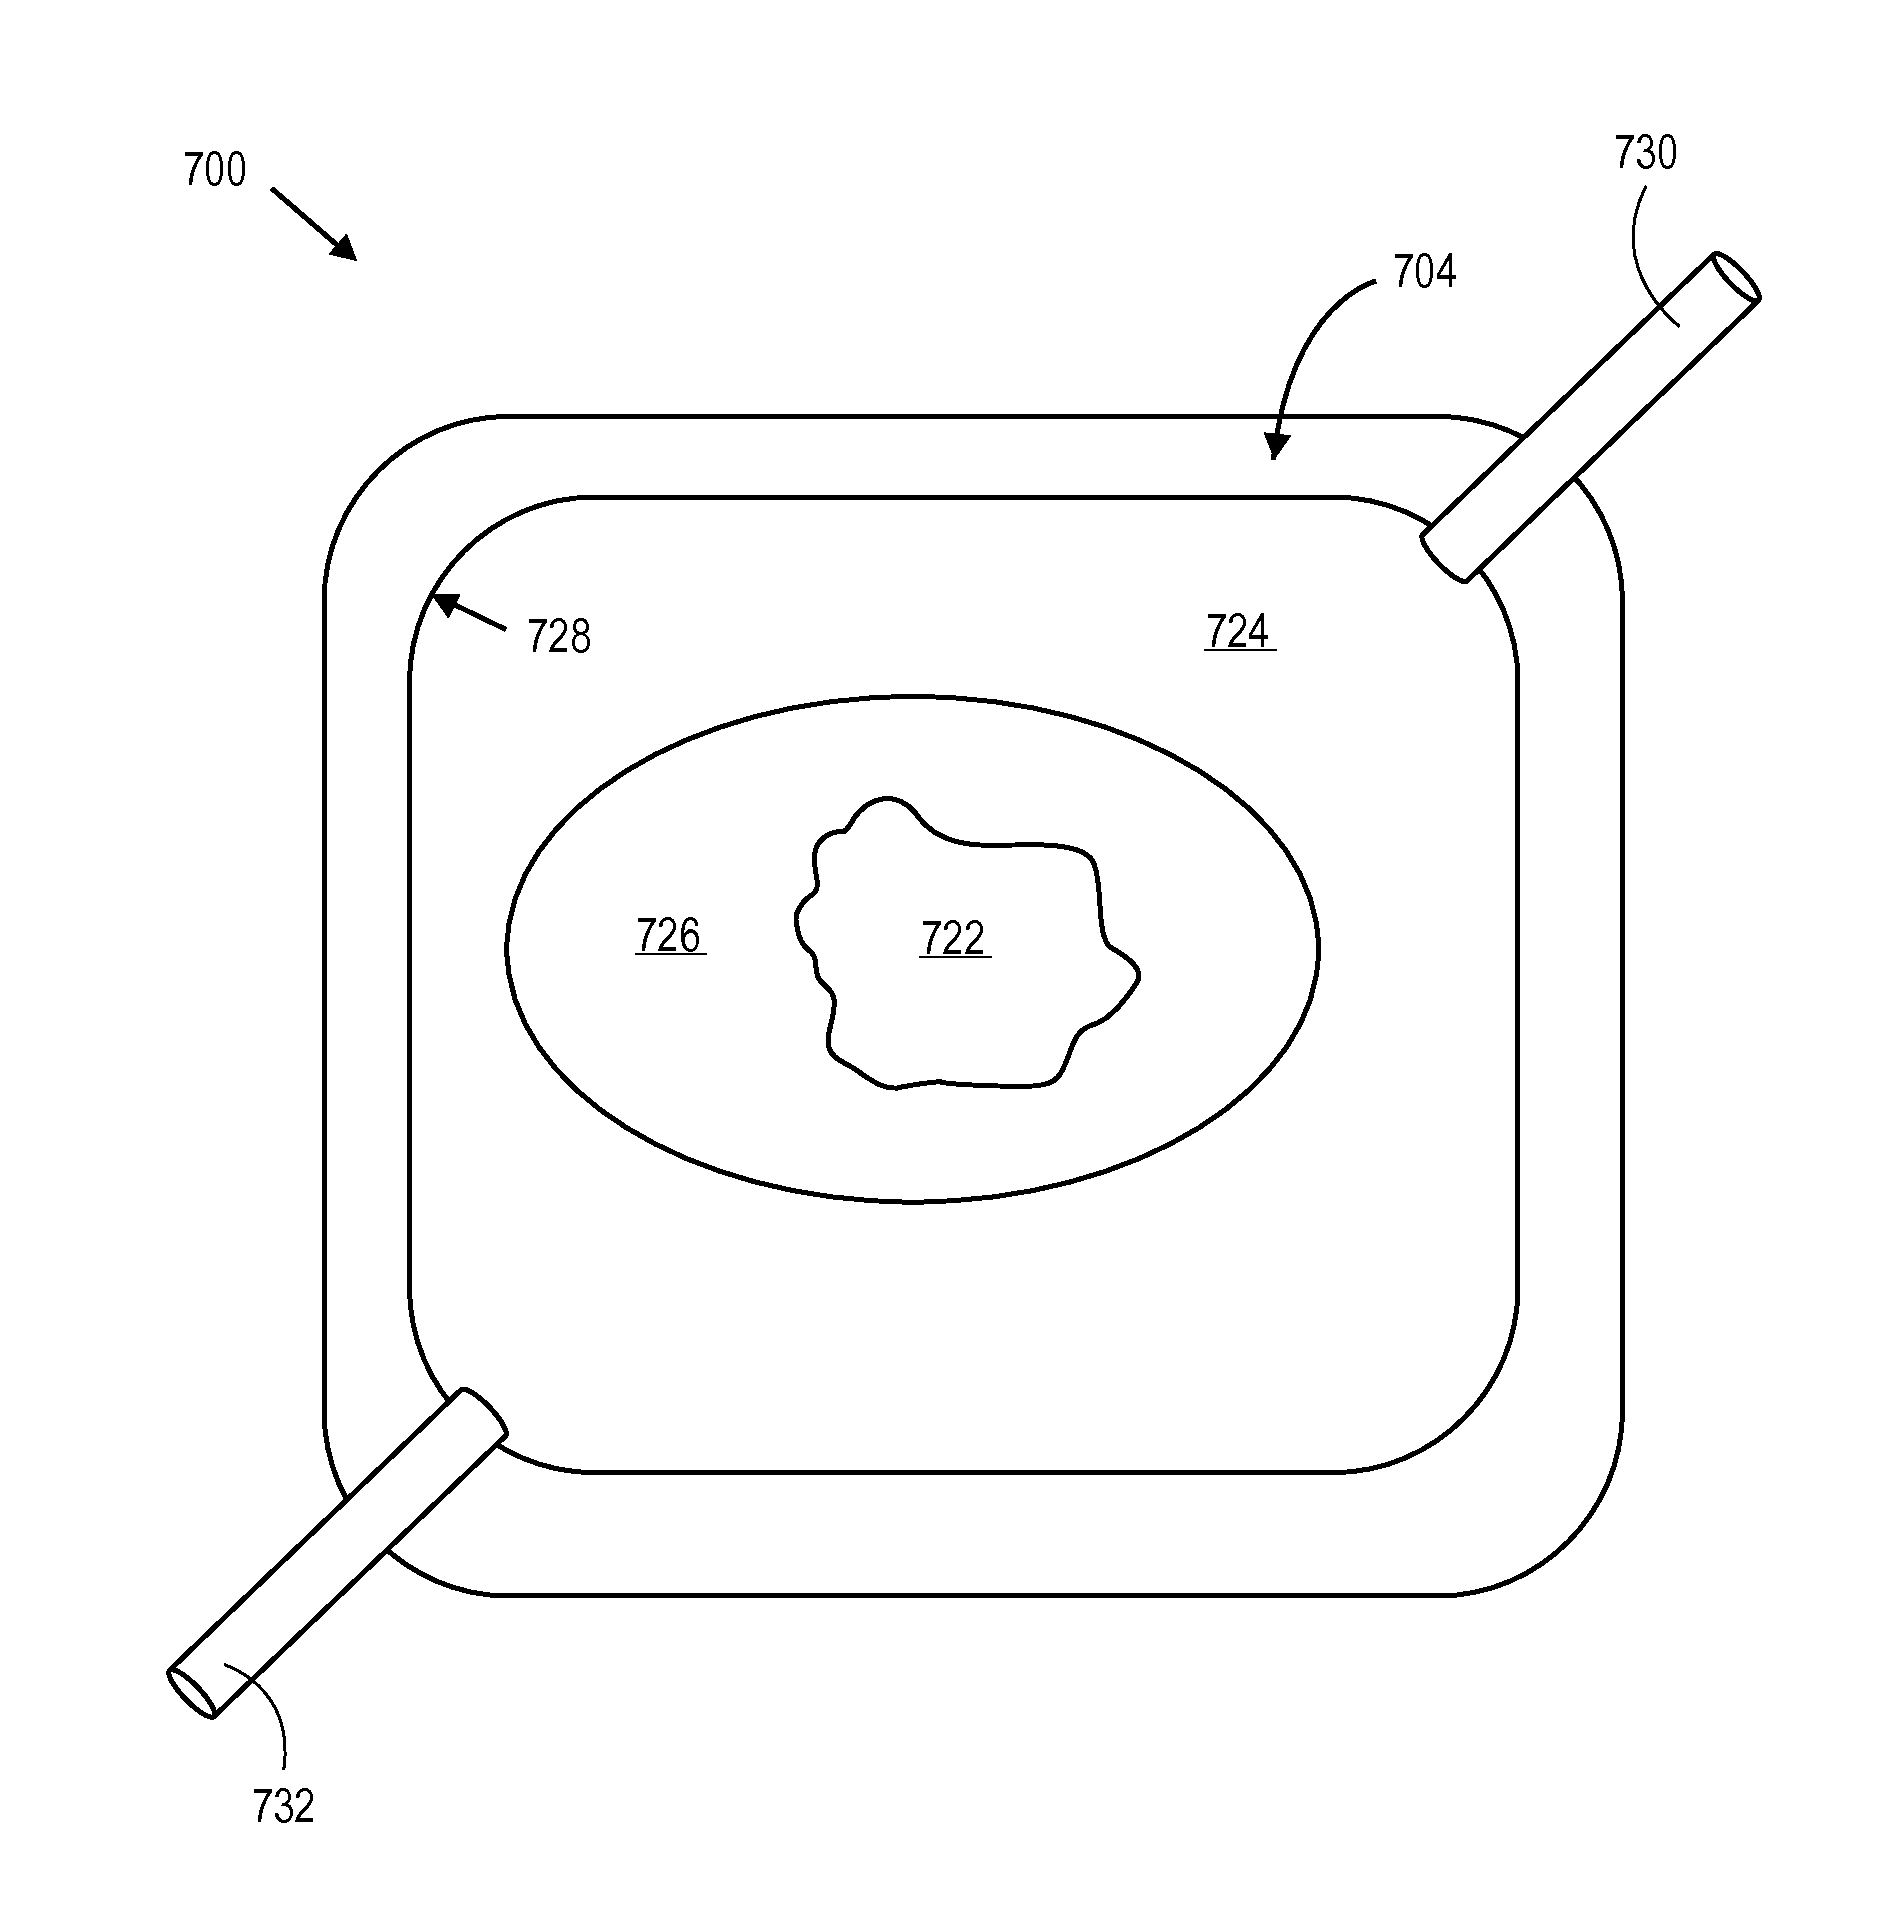 Electrokinetic pump based wound treatment system and methods